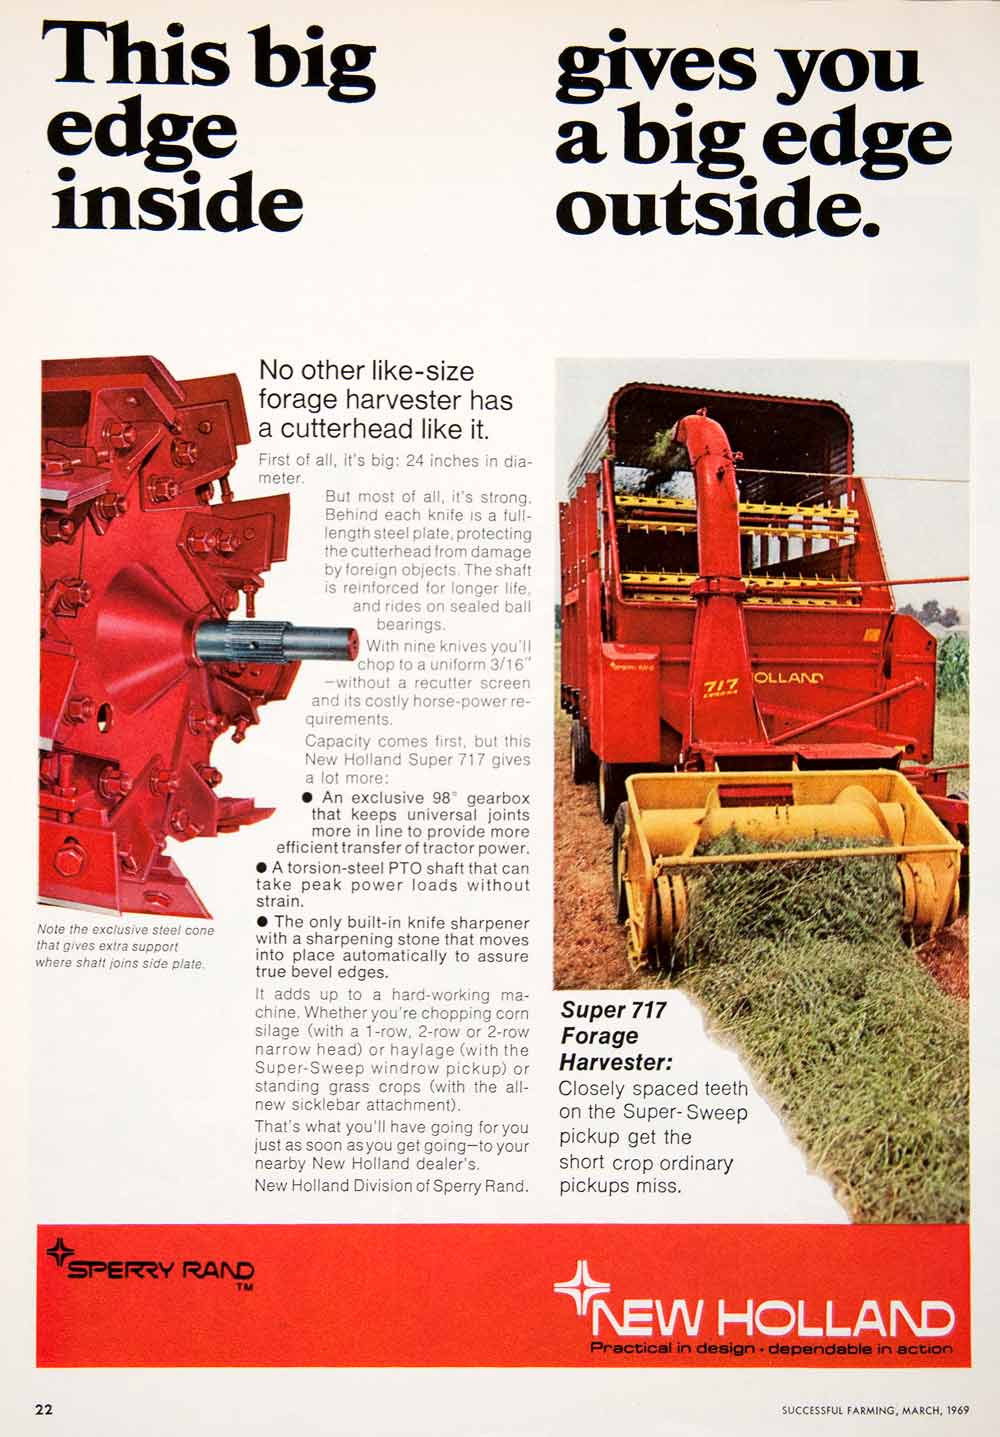 1969 Ad Sperry Rand New Holland Forage Harvester Tractor Farming Agriculture SF1